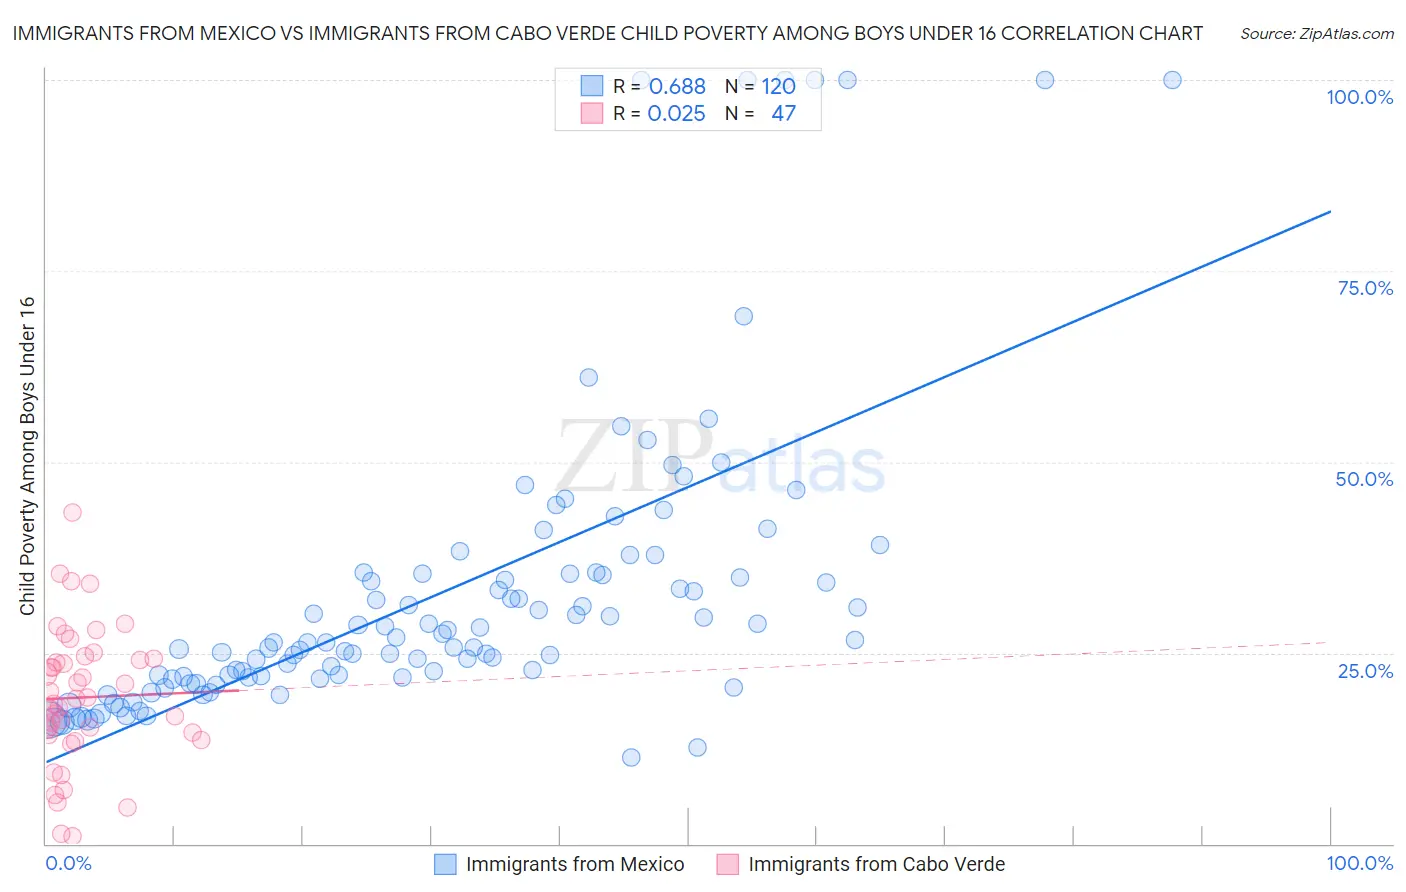 Immigrants from Mexico vs Immigrants from Cabo Verde Child Poverty Among Boys Under 16